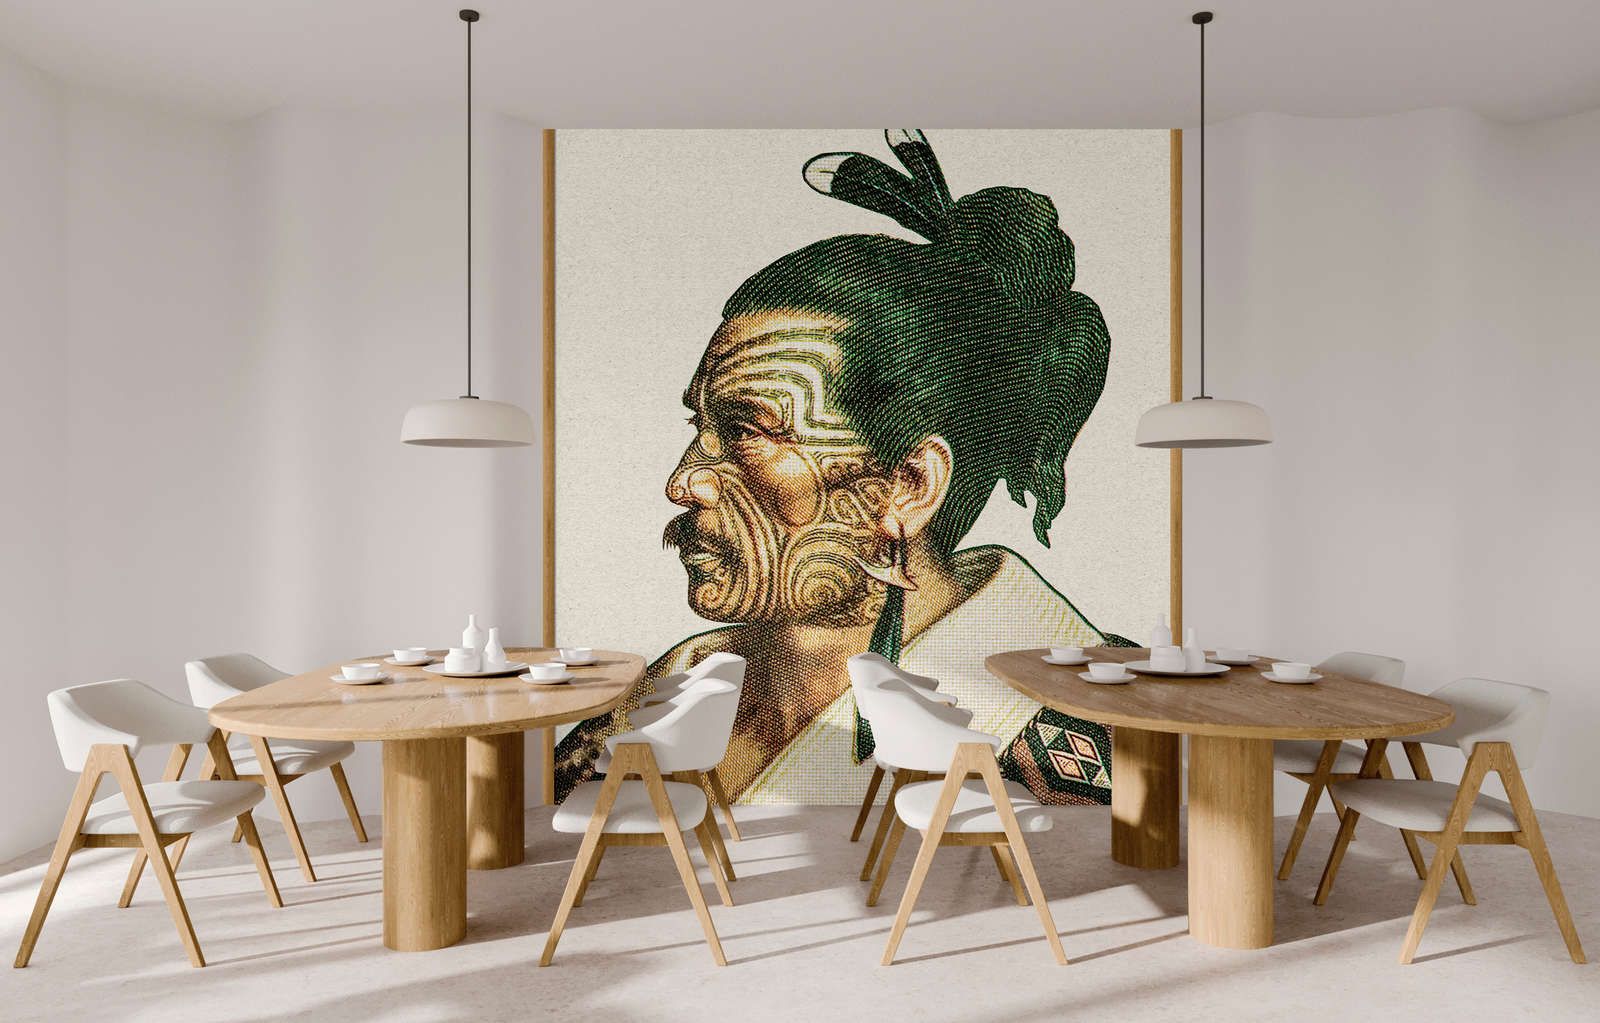             Photo wallpaper »horishi« - African portrait in pixel style with kraft paper texture - matt, smooth non-woven fabric
        